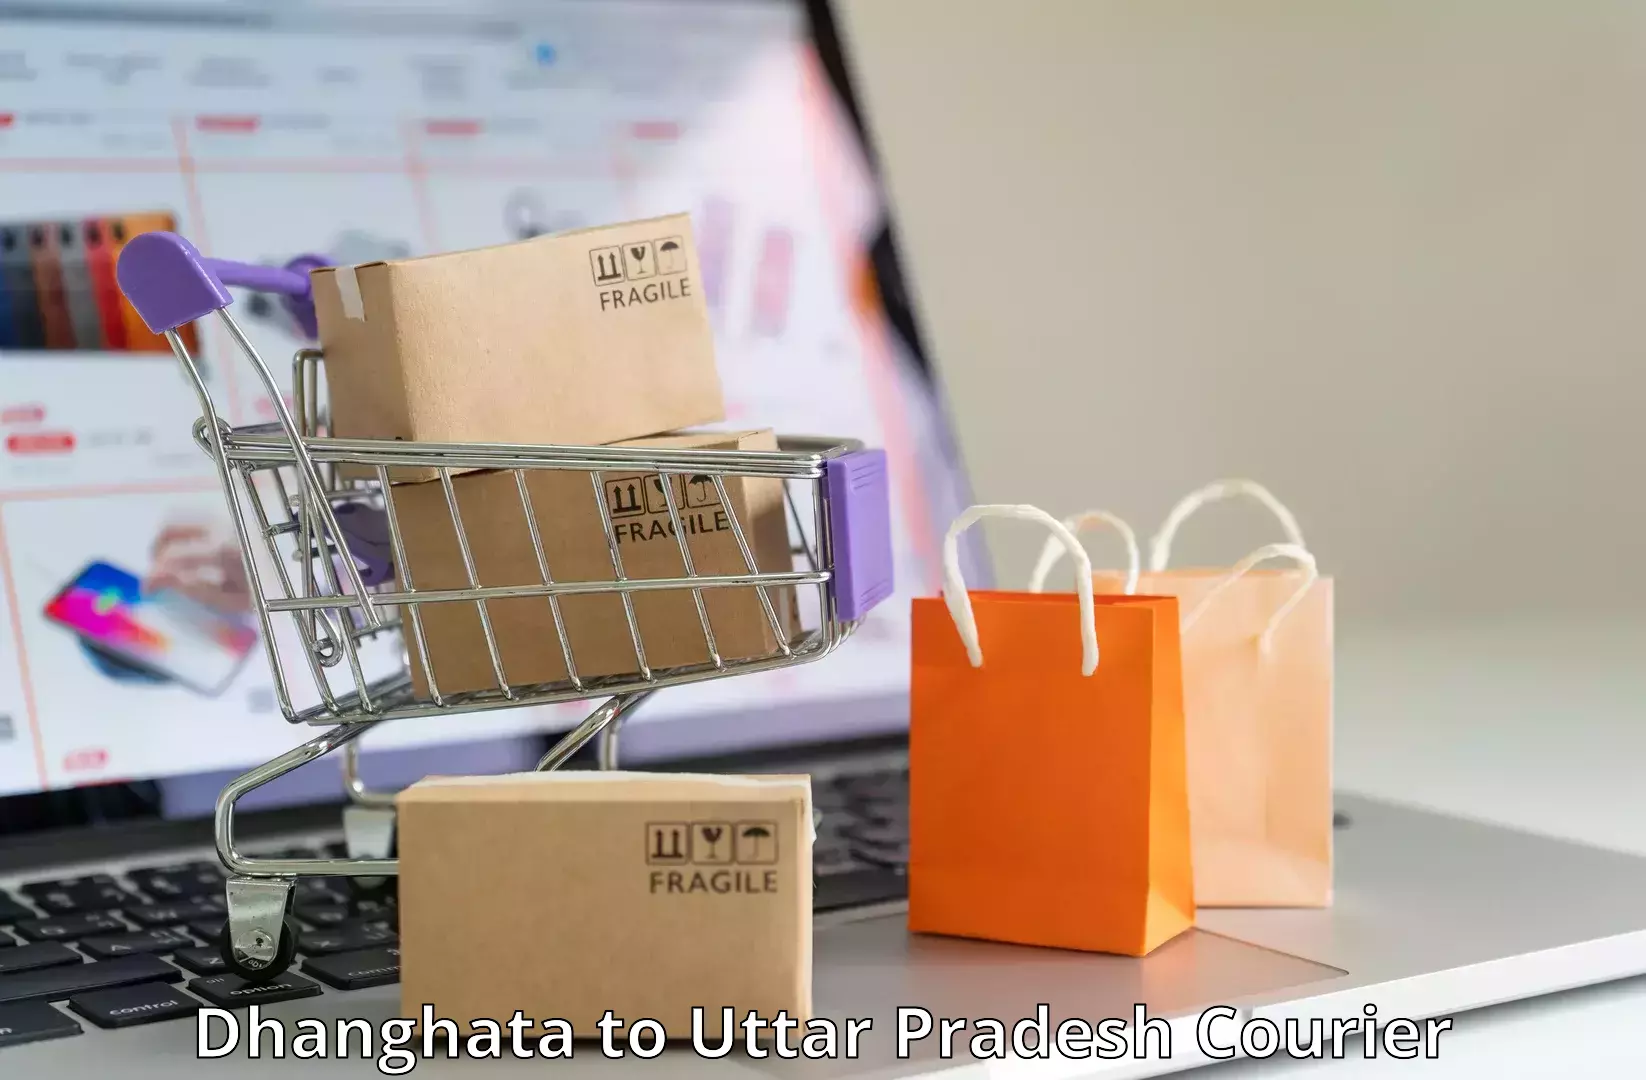 Customized delivery options Dhanghata to Uttar Pradesh